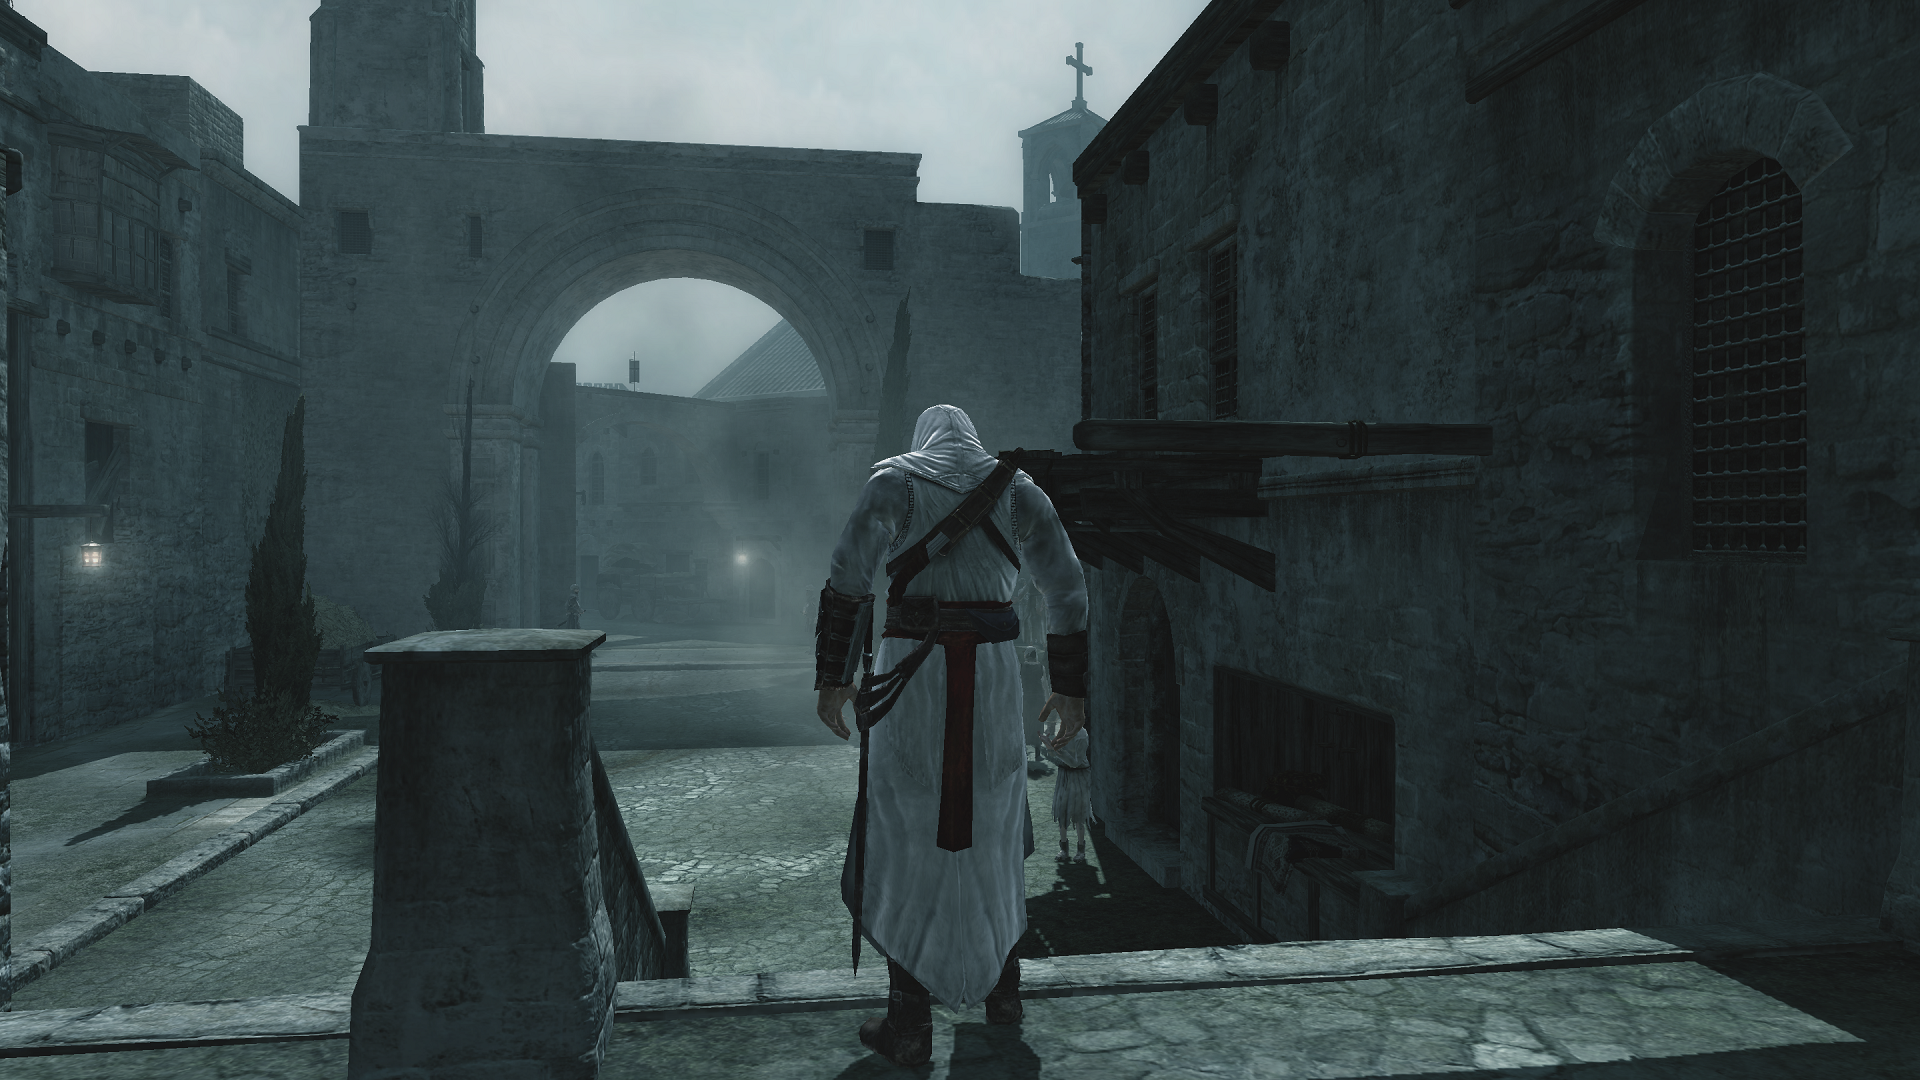 assassinscreed_dx1020iflx4.png